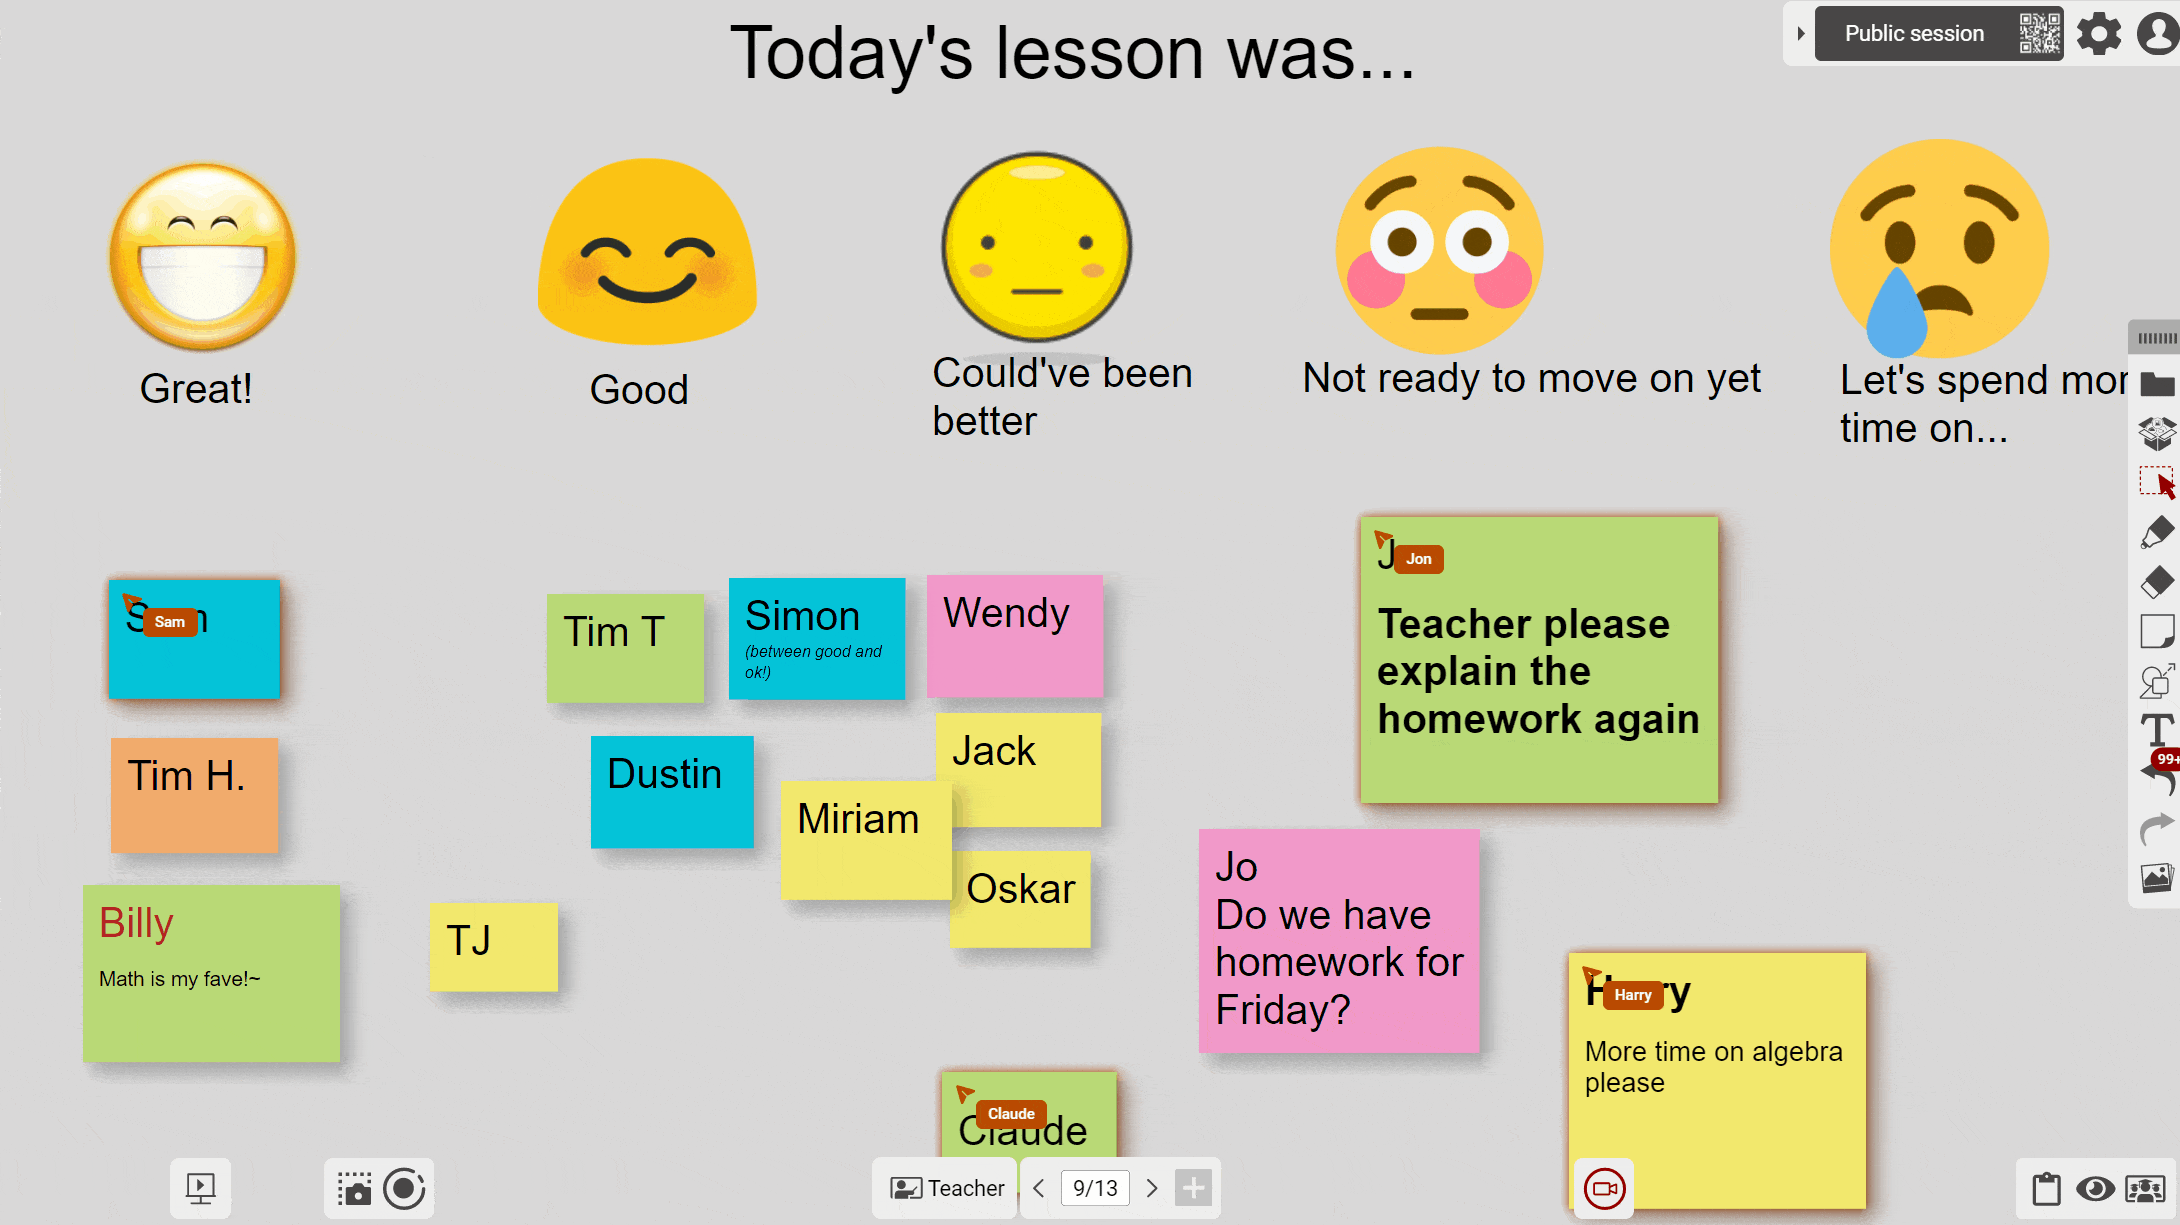 myViewBoard Classroom for getting student feedback about lesson content